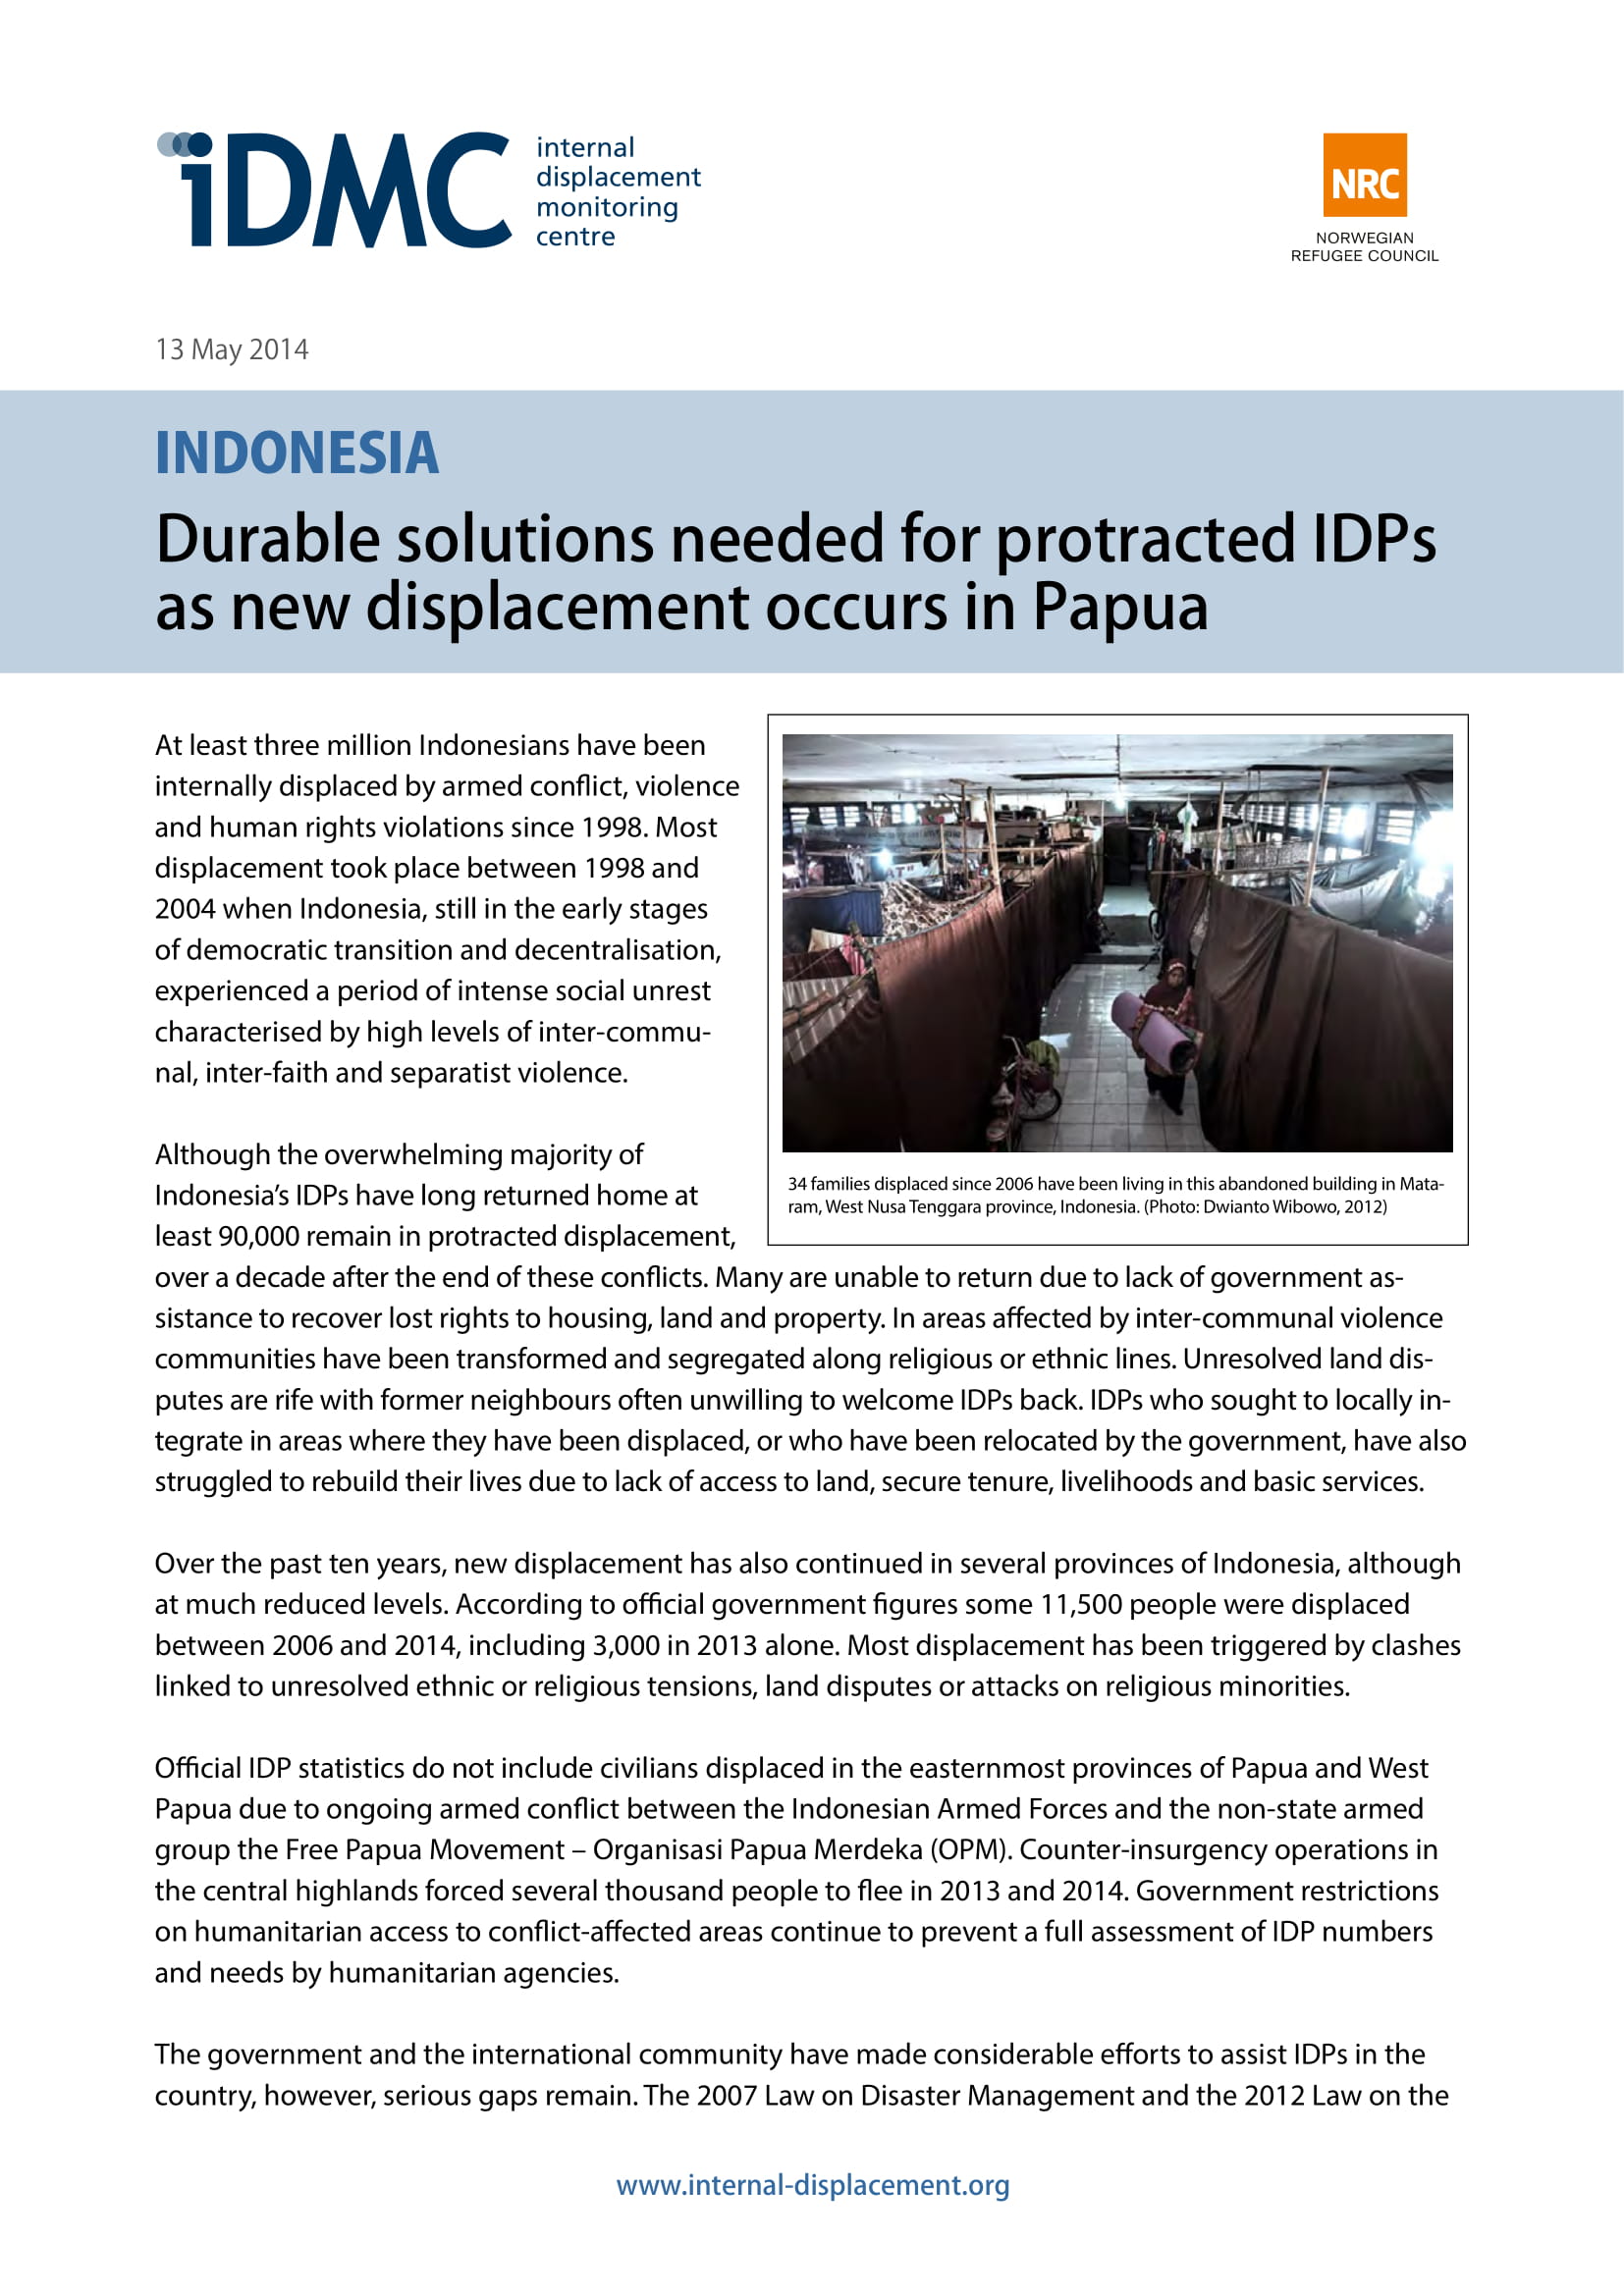 Indonesia: Durable solutions needed for protracted IDPs as new displacement occurs in Papua